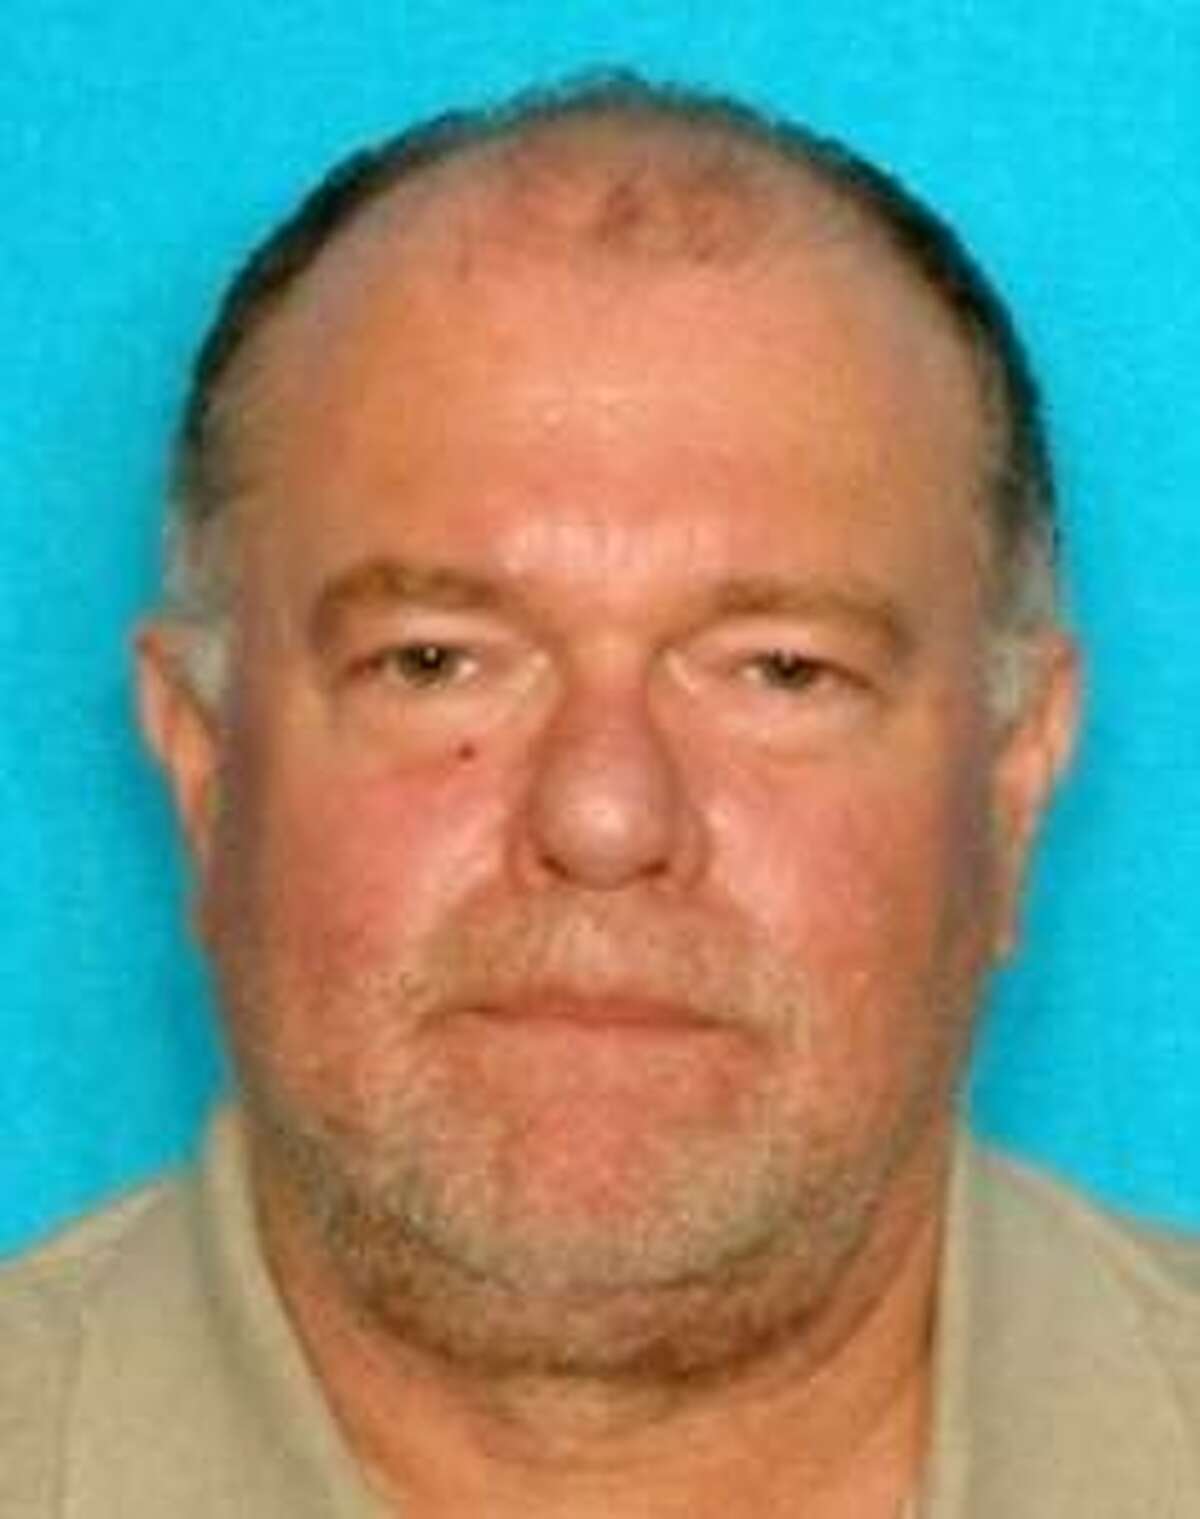 Mark Timothy McBride, 58, is wanted for failure to comply with sex offender registration requirements and for violating his parole and probation.